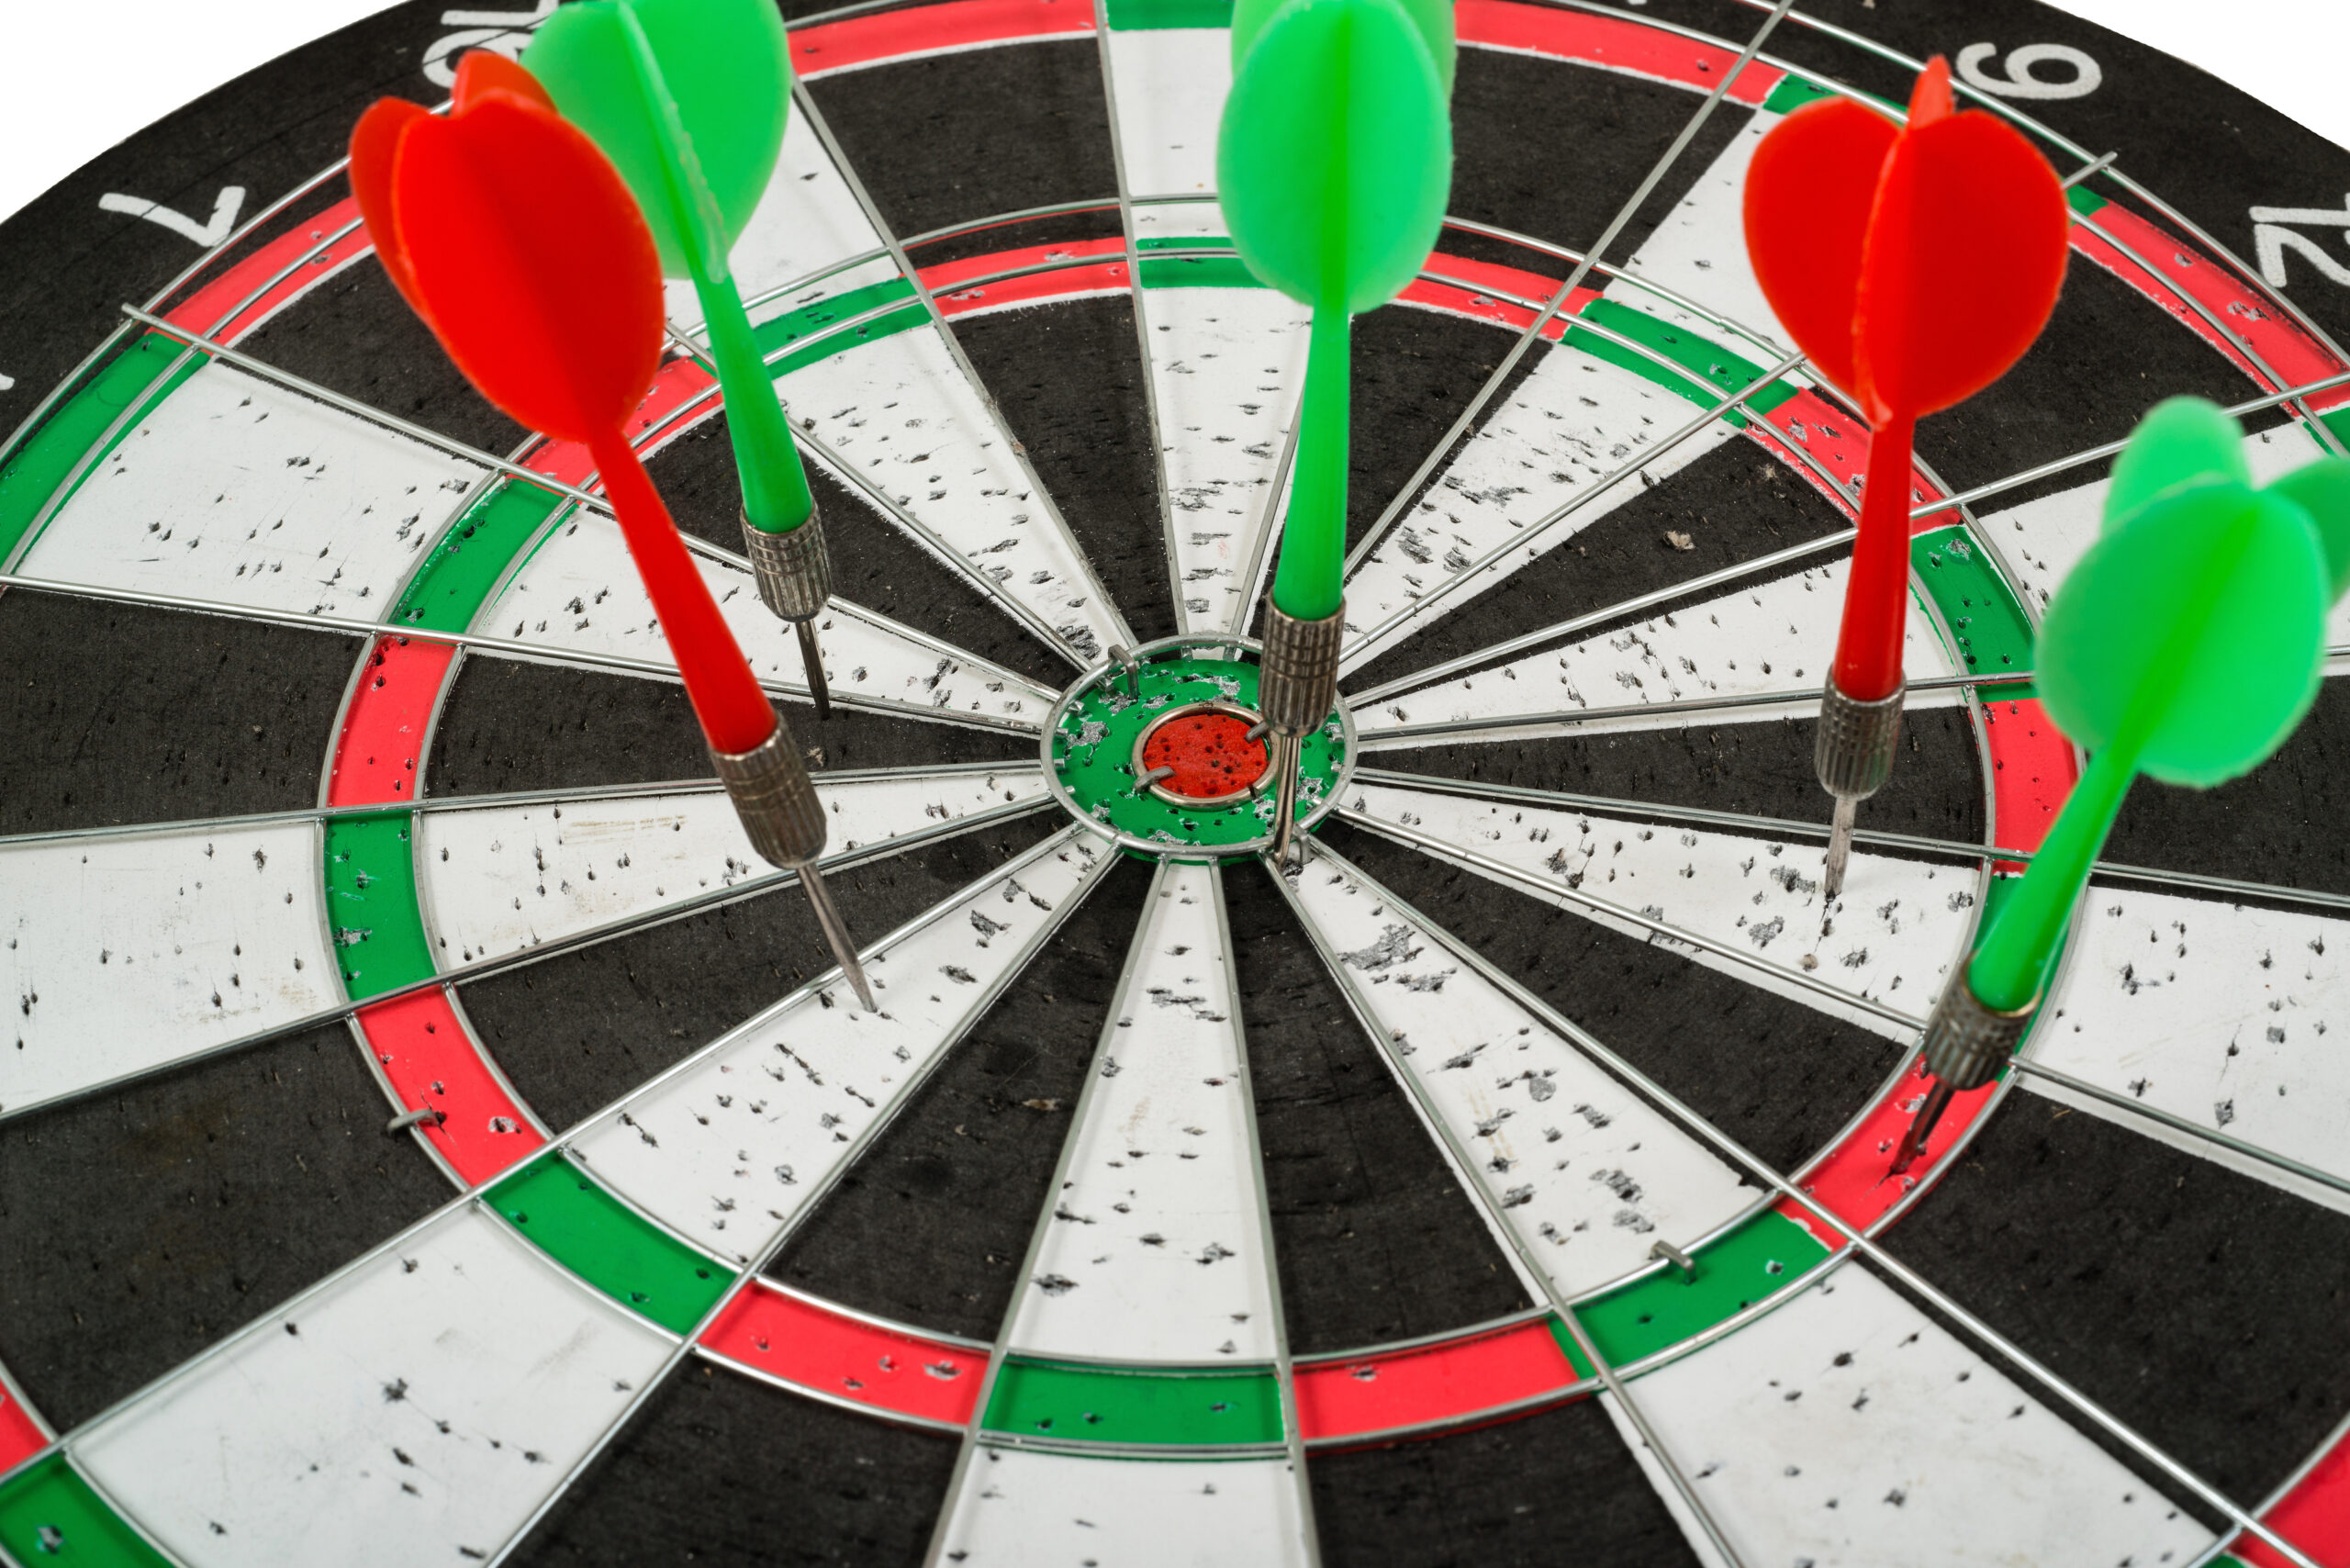 Dartboard with green and red darts on the board.